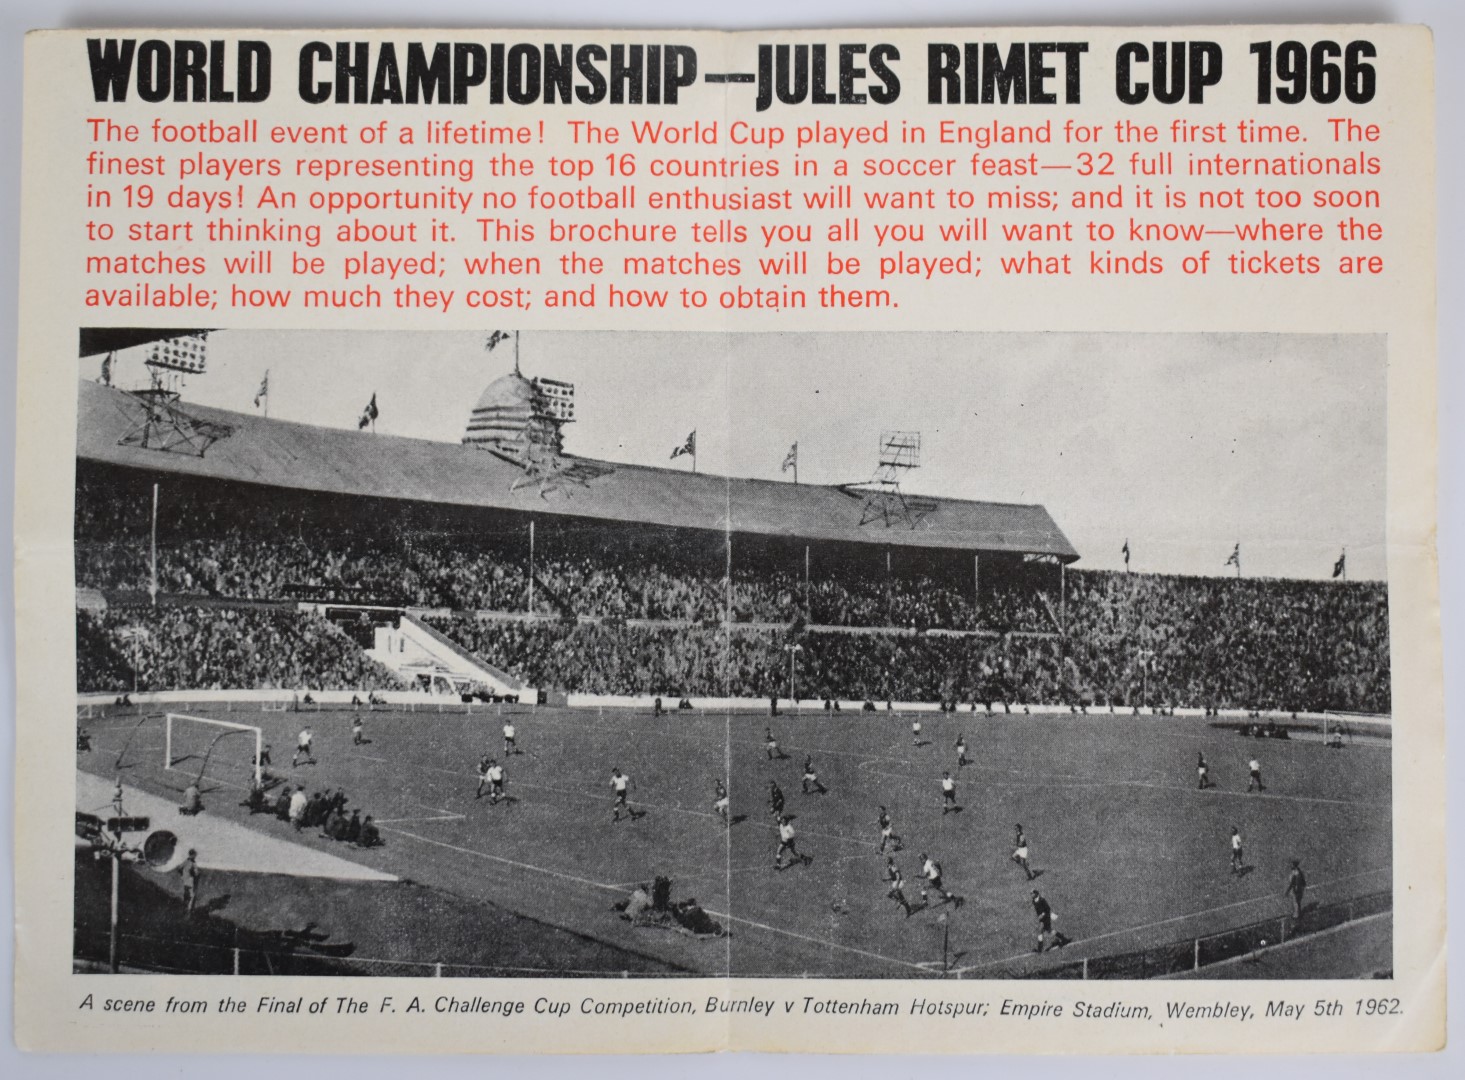 1966 Jules Rimet Cup World Championship football programme and ticket for the final tie England v - Image 8 of 8